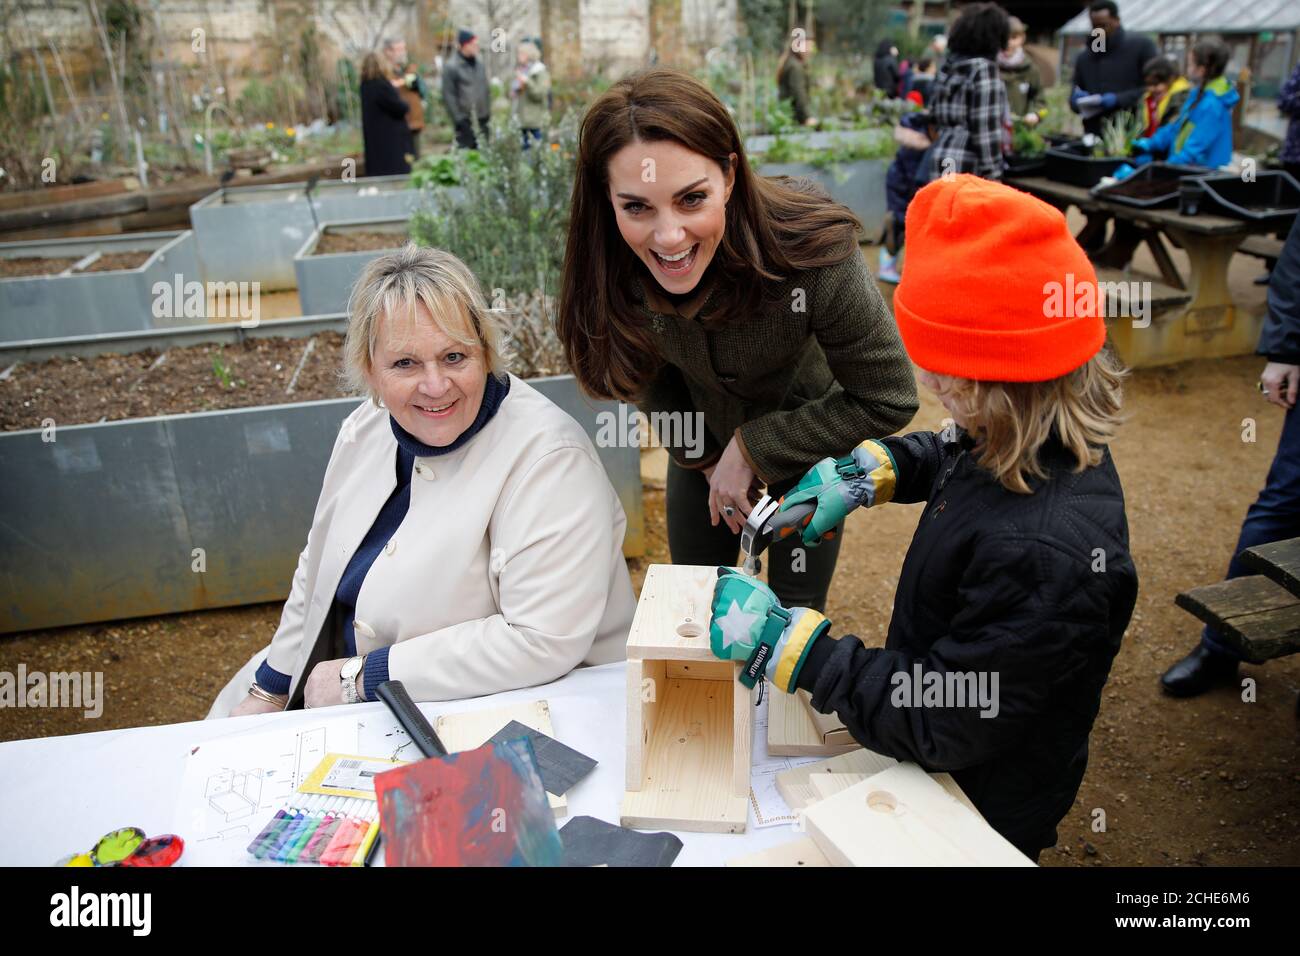 The Duchess of Cambridge helps make bird boxes during a visit to the King Henry's Walk Garden in Islington, London to learn about a project bringing people together through a shared love of horticulture. Stock Photo